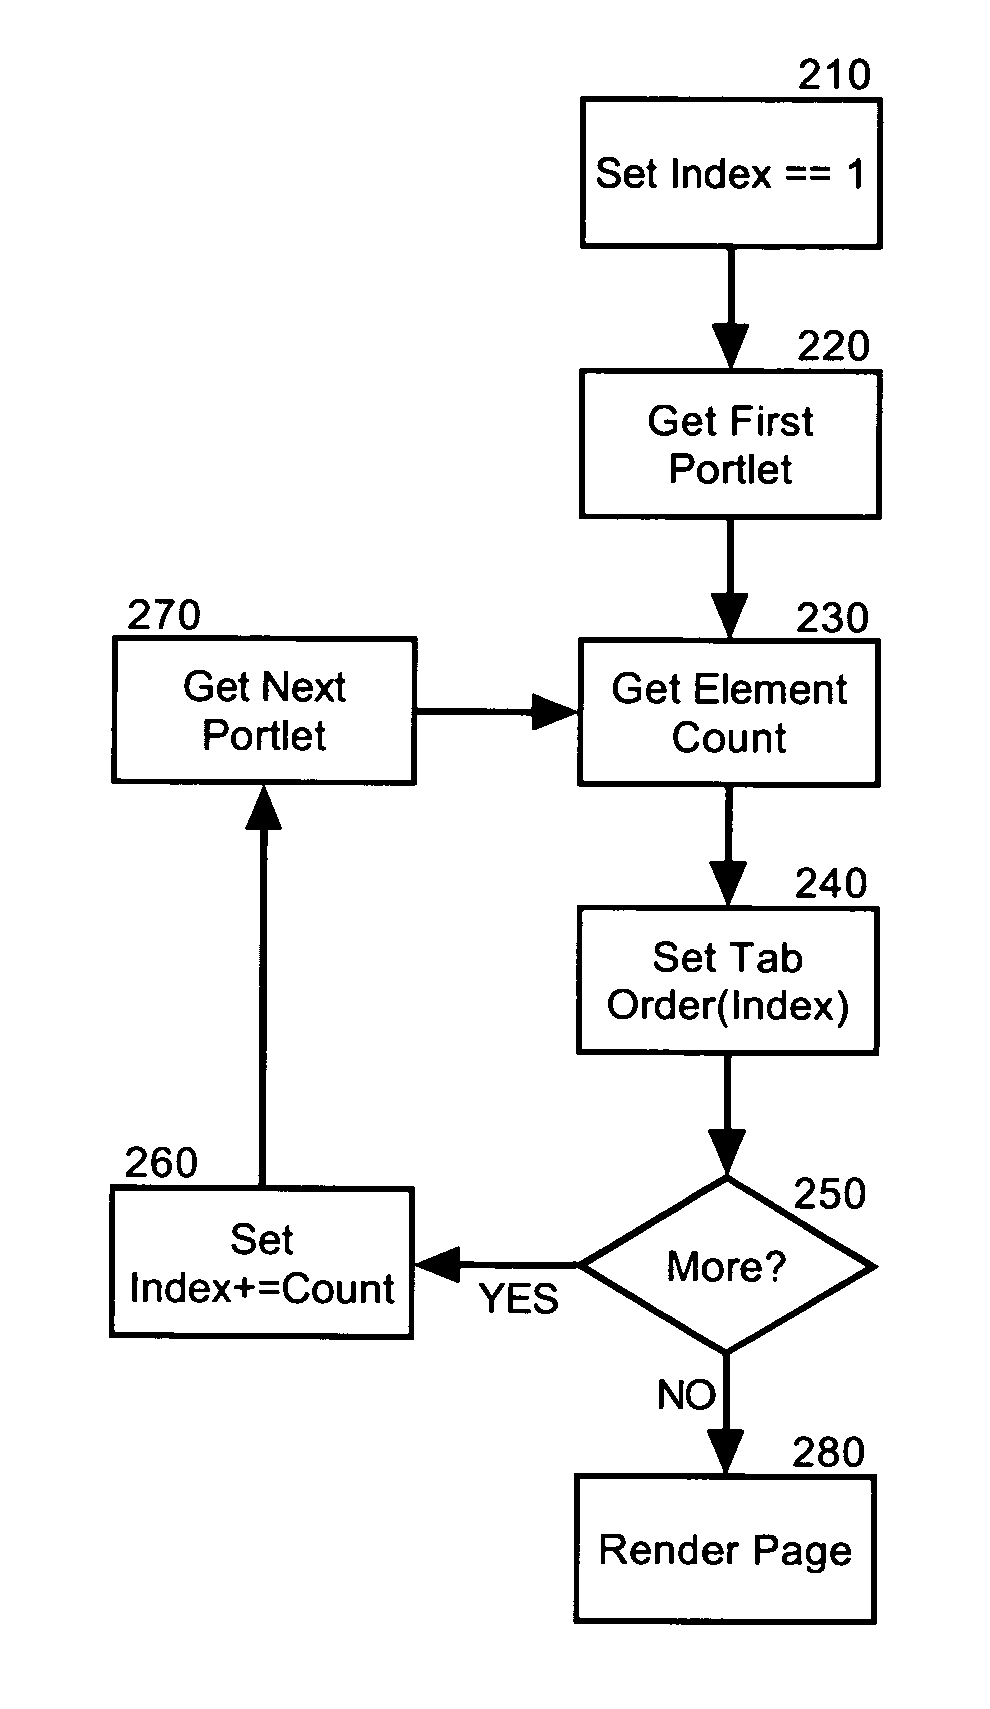 Tab order management in a portal environment